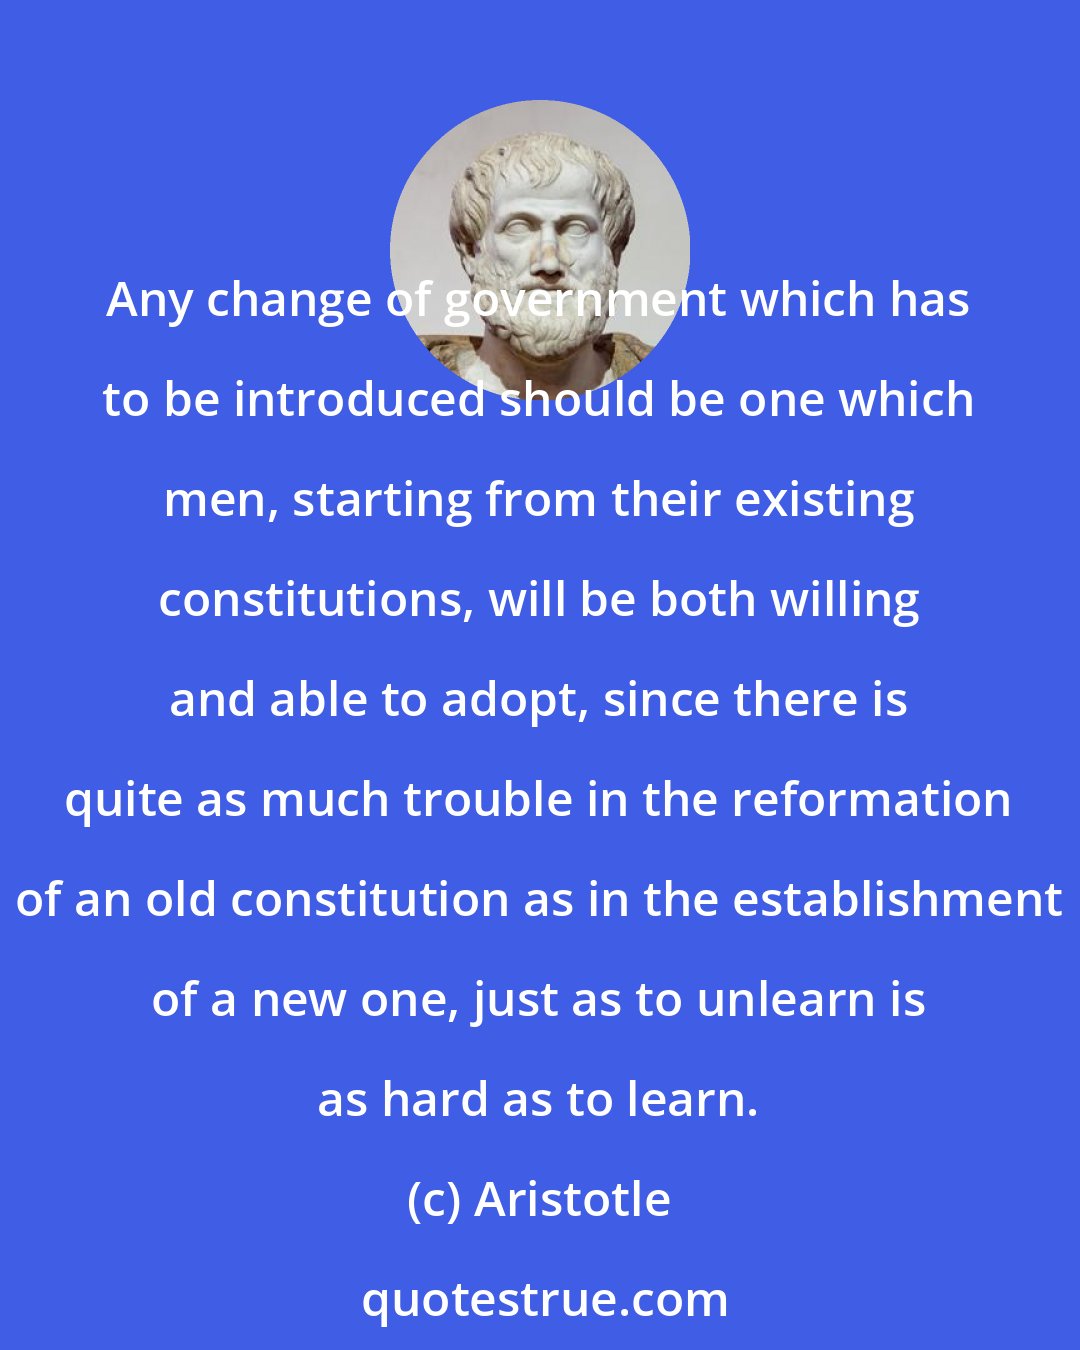 Aristotle: Any change of government which has to be introduced should be one which men, starting from their existing constitutions, will be both willing and able to adopt, since there is quite as much trouble in the reformation of an old constitution as in the establishment of a new one, just as to unlearn is as hard as to learn.